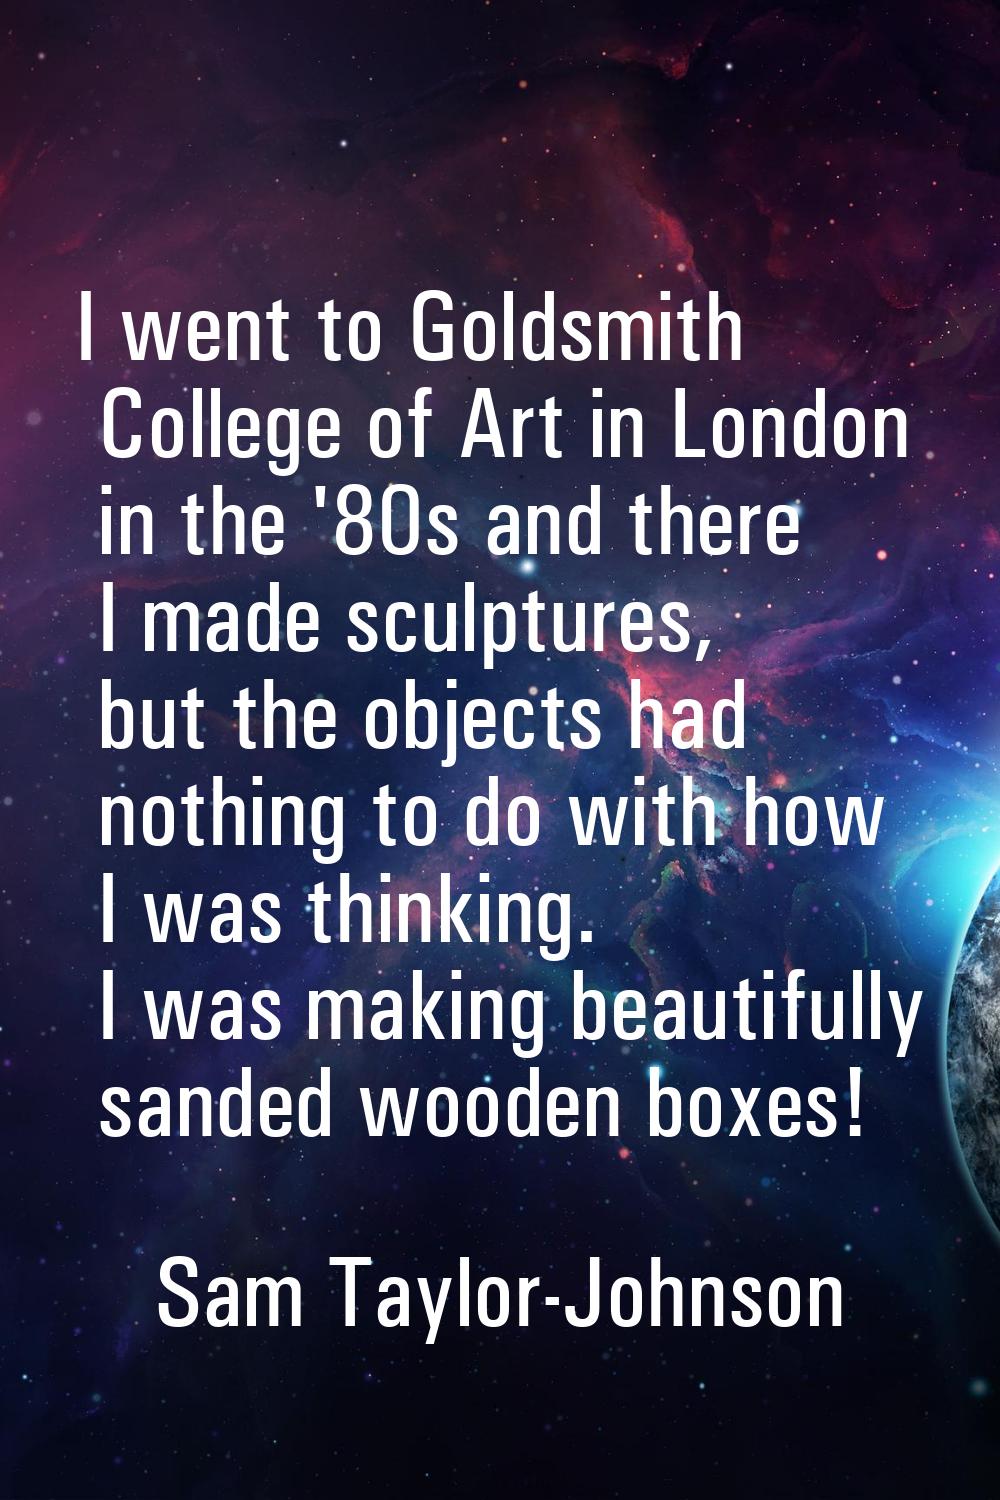 I went to Goldsmith College of Art in London in the '80s and there I made sculptures, but the objec